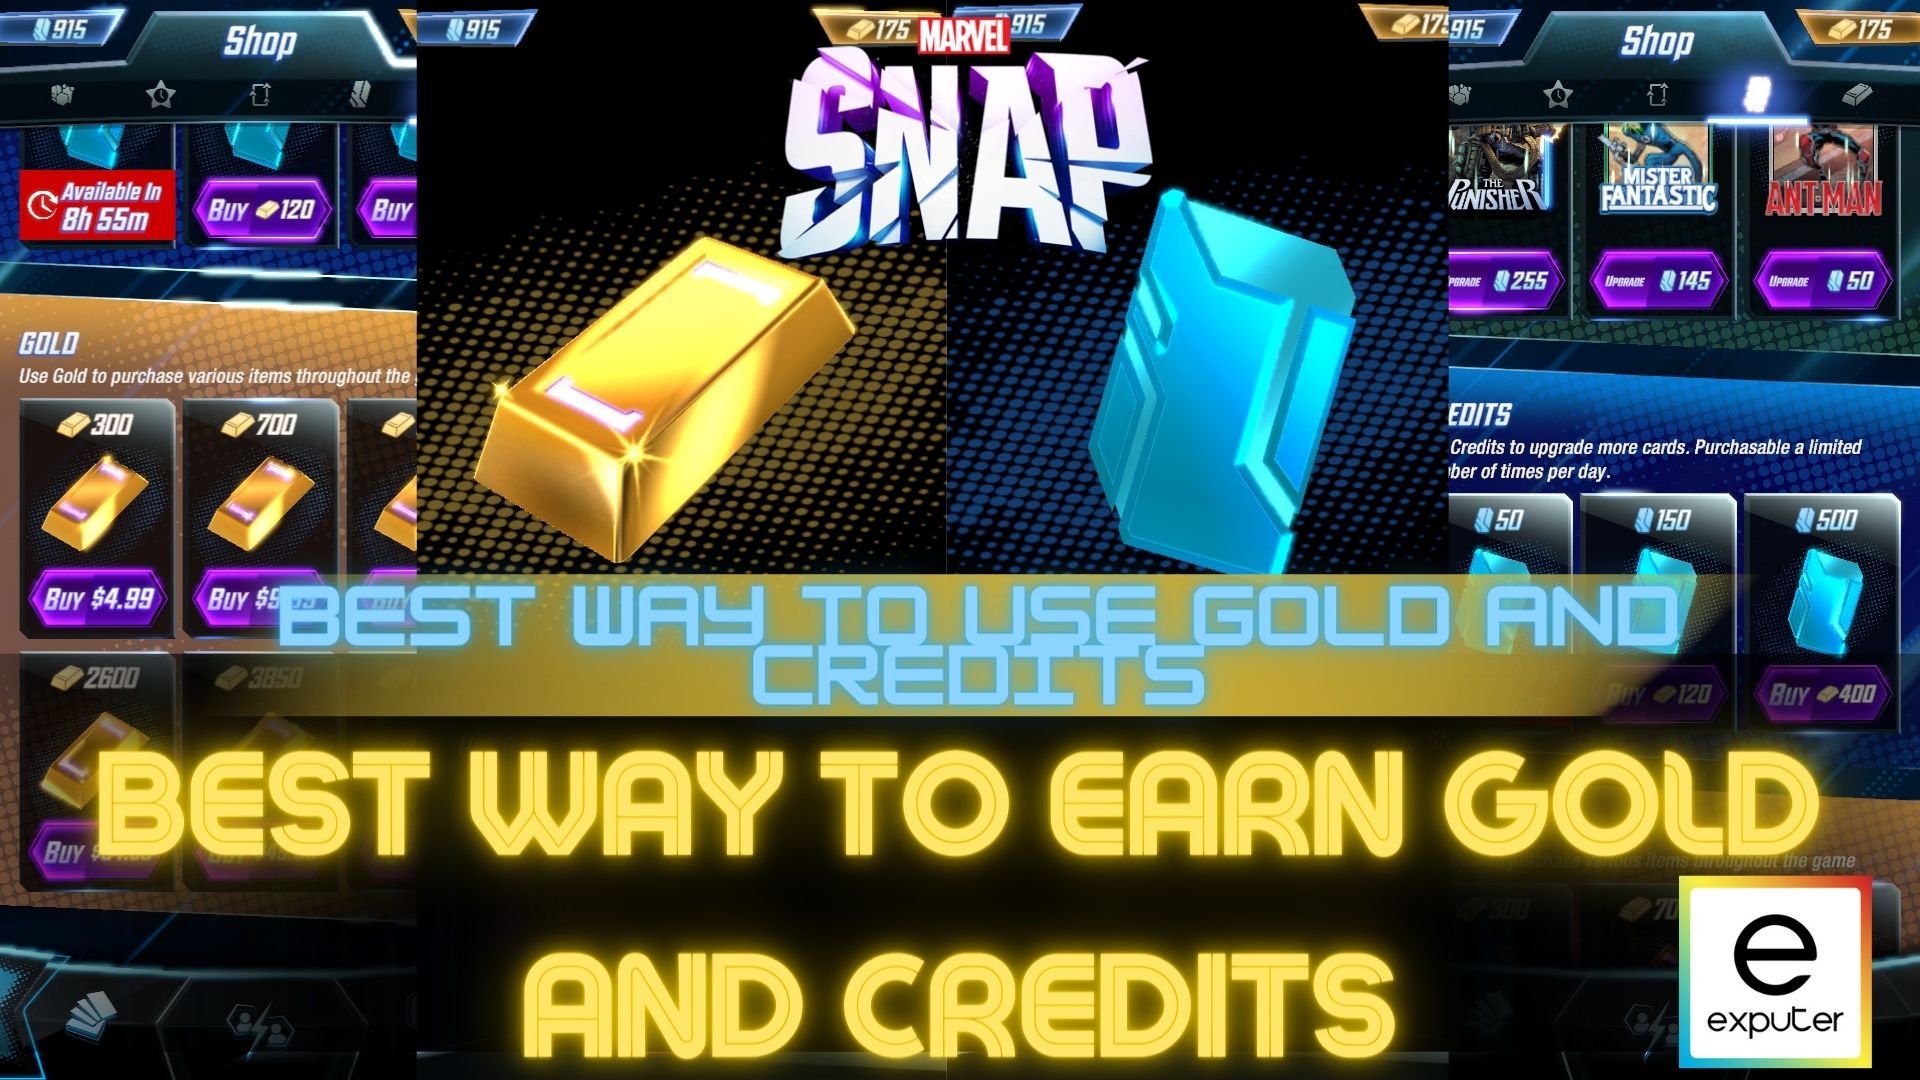 Marvel Snap Best Way To Earn Gold and Credits